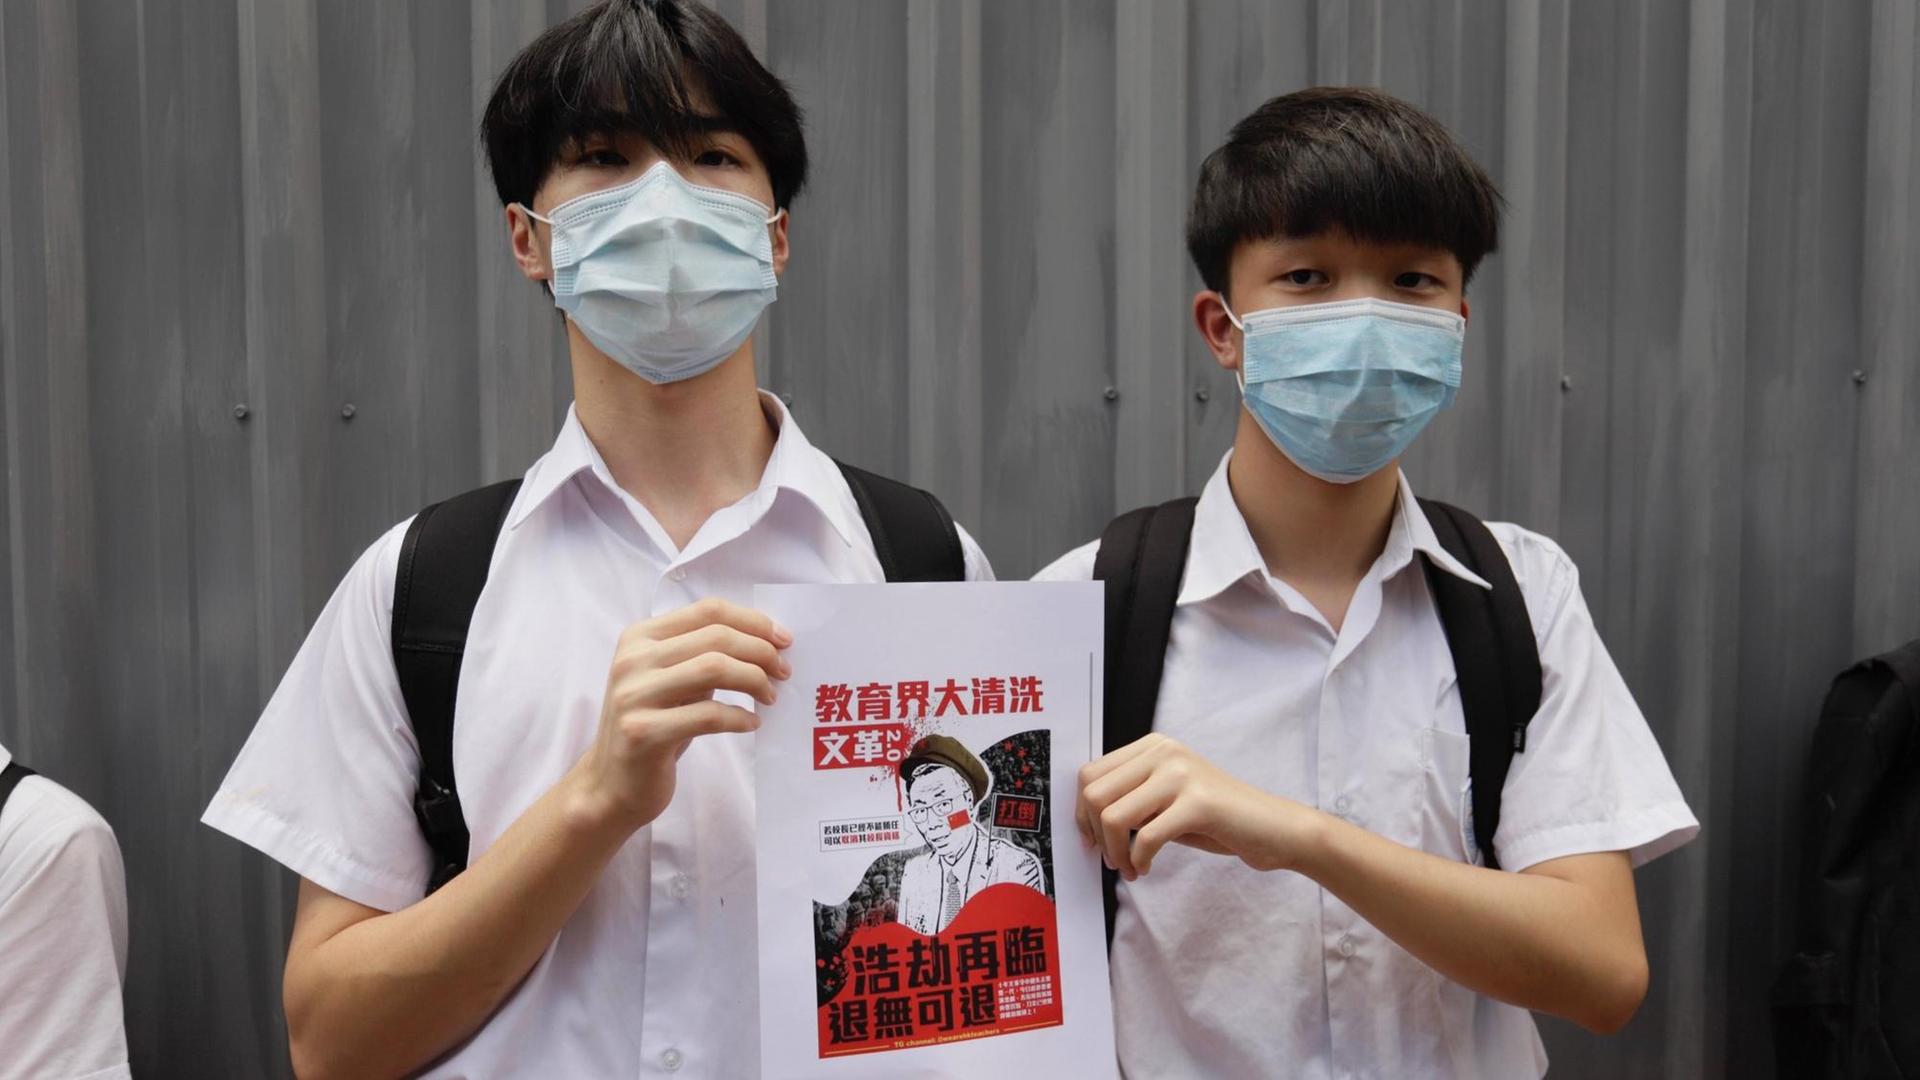 June 12, 2020, Hong Kong, CHINA: Male students displaying a small poster outside HEUNG TO MIDDLE SCHOOL, a traditionally pro-Beijing leftist school. On the poster is written : HUGE PURGE AMONG THE ACADEMIES, CULTURE REVOLUTION NO.2, CATASTROPHE HAD RETURED, THERE IS NO ROOM FOR RETREATING. June-12,2020 Hong Kong.ZUMA/ Hong Kong CHINA - ZUMAl137 20200612zapl137008 Copyright: xLiauxChung-renx